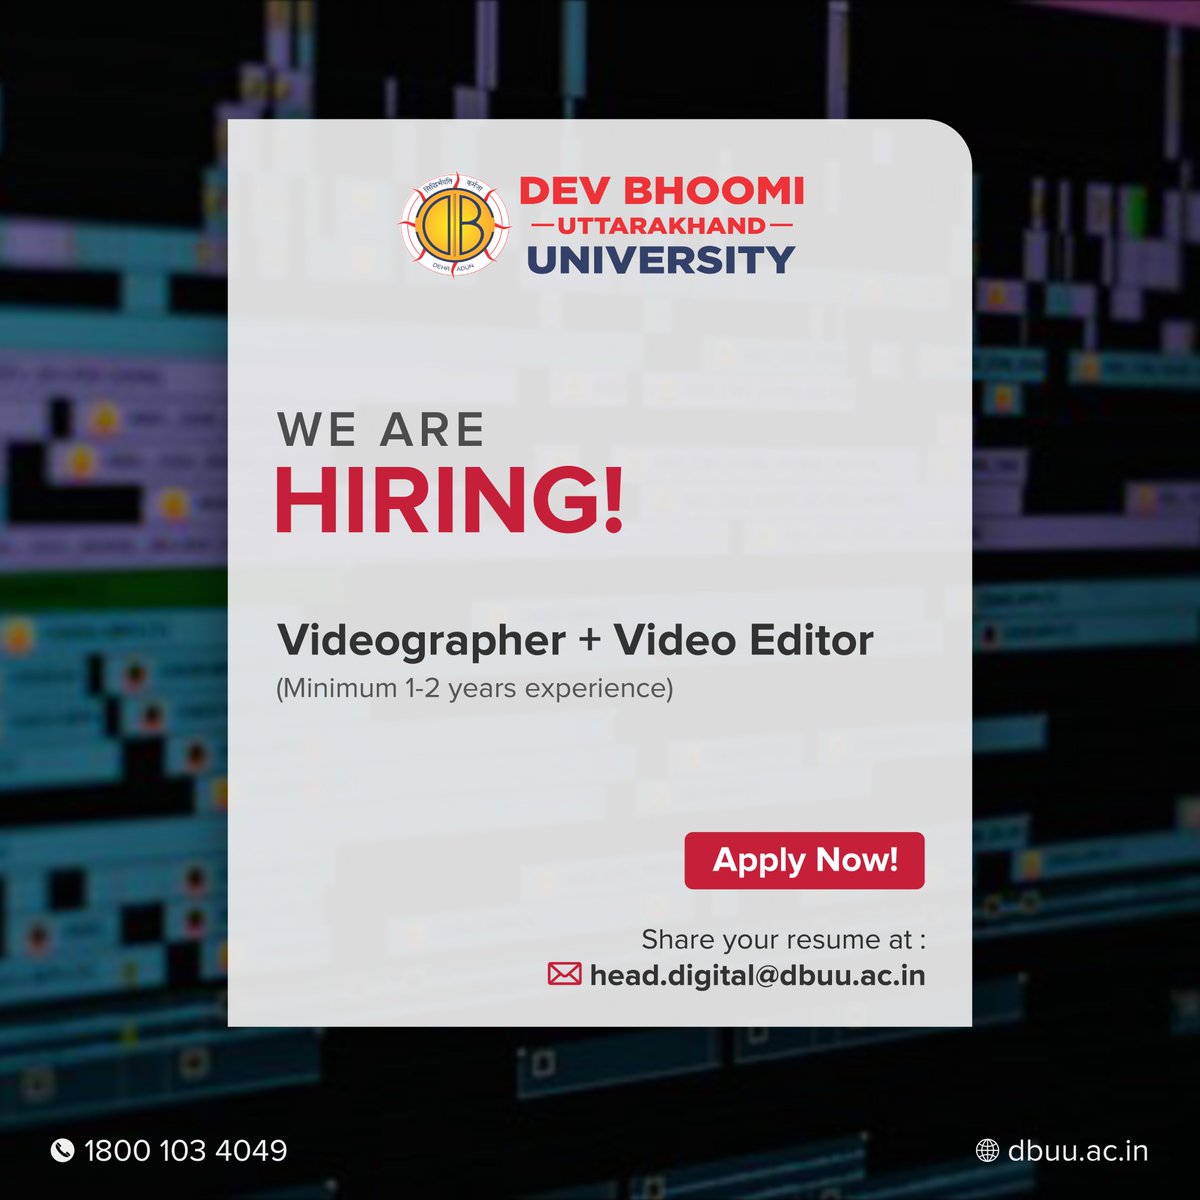 Join our team at Dev Bhoomi Uttarakhand University!

We're seeking a talented videographer + Video editor with a minimum of 2 years of experience to capture and craft compelling visual stories. 

Share your resume at 𝗵𝗲𝗮𝗱.𝗱𝗶𝗴𝗶𝘁𝗮𝗹@𝗱𝗯𝘂𝘂.𝗮𝗰.𝗶𝗻

#dbuu #lifeatdbuu